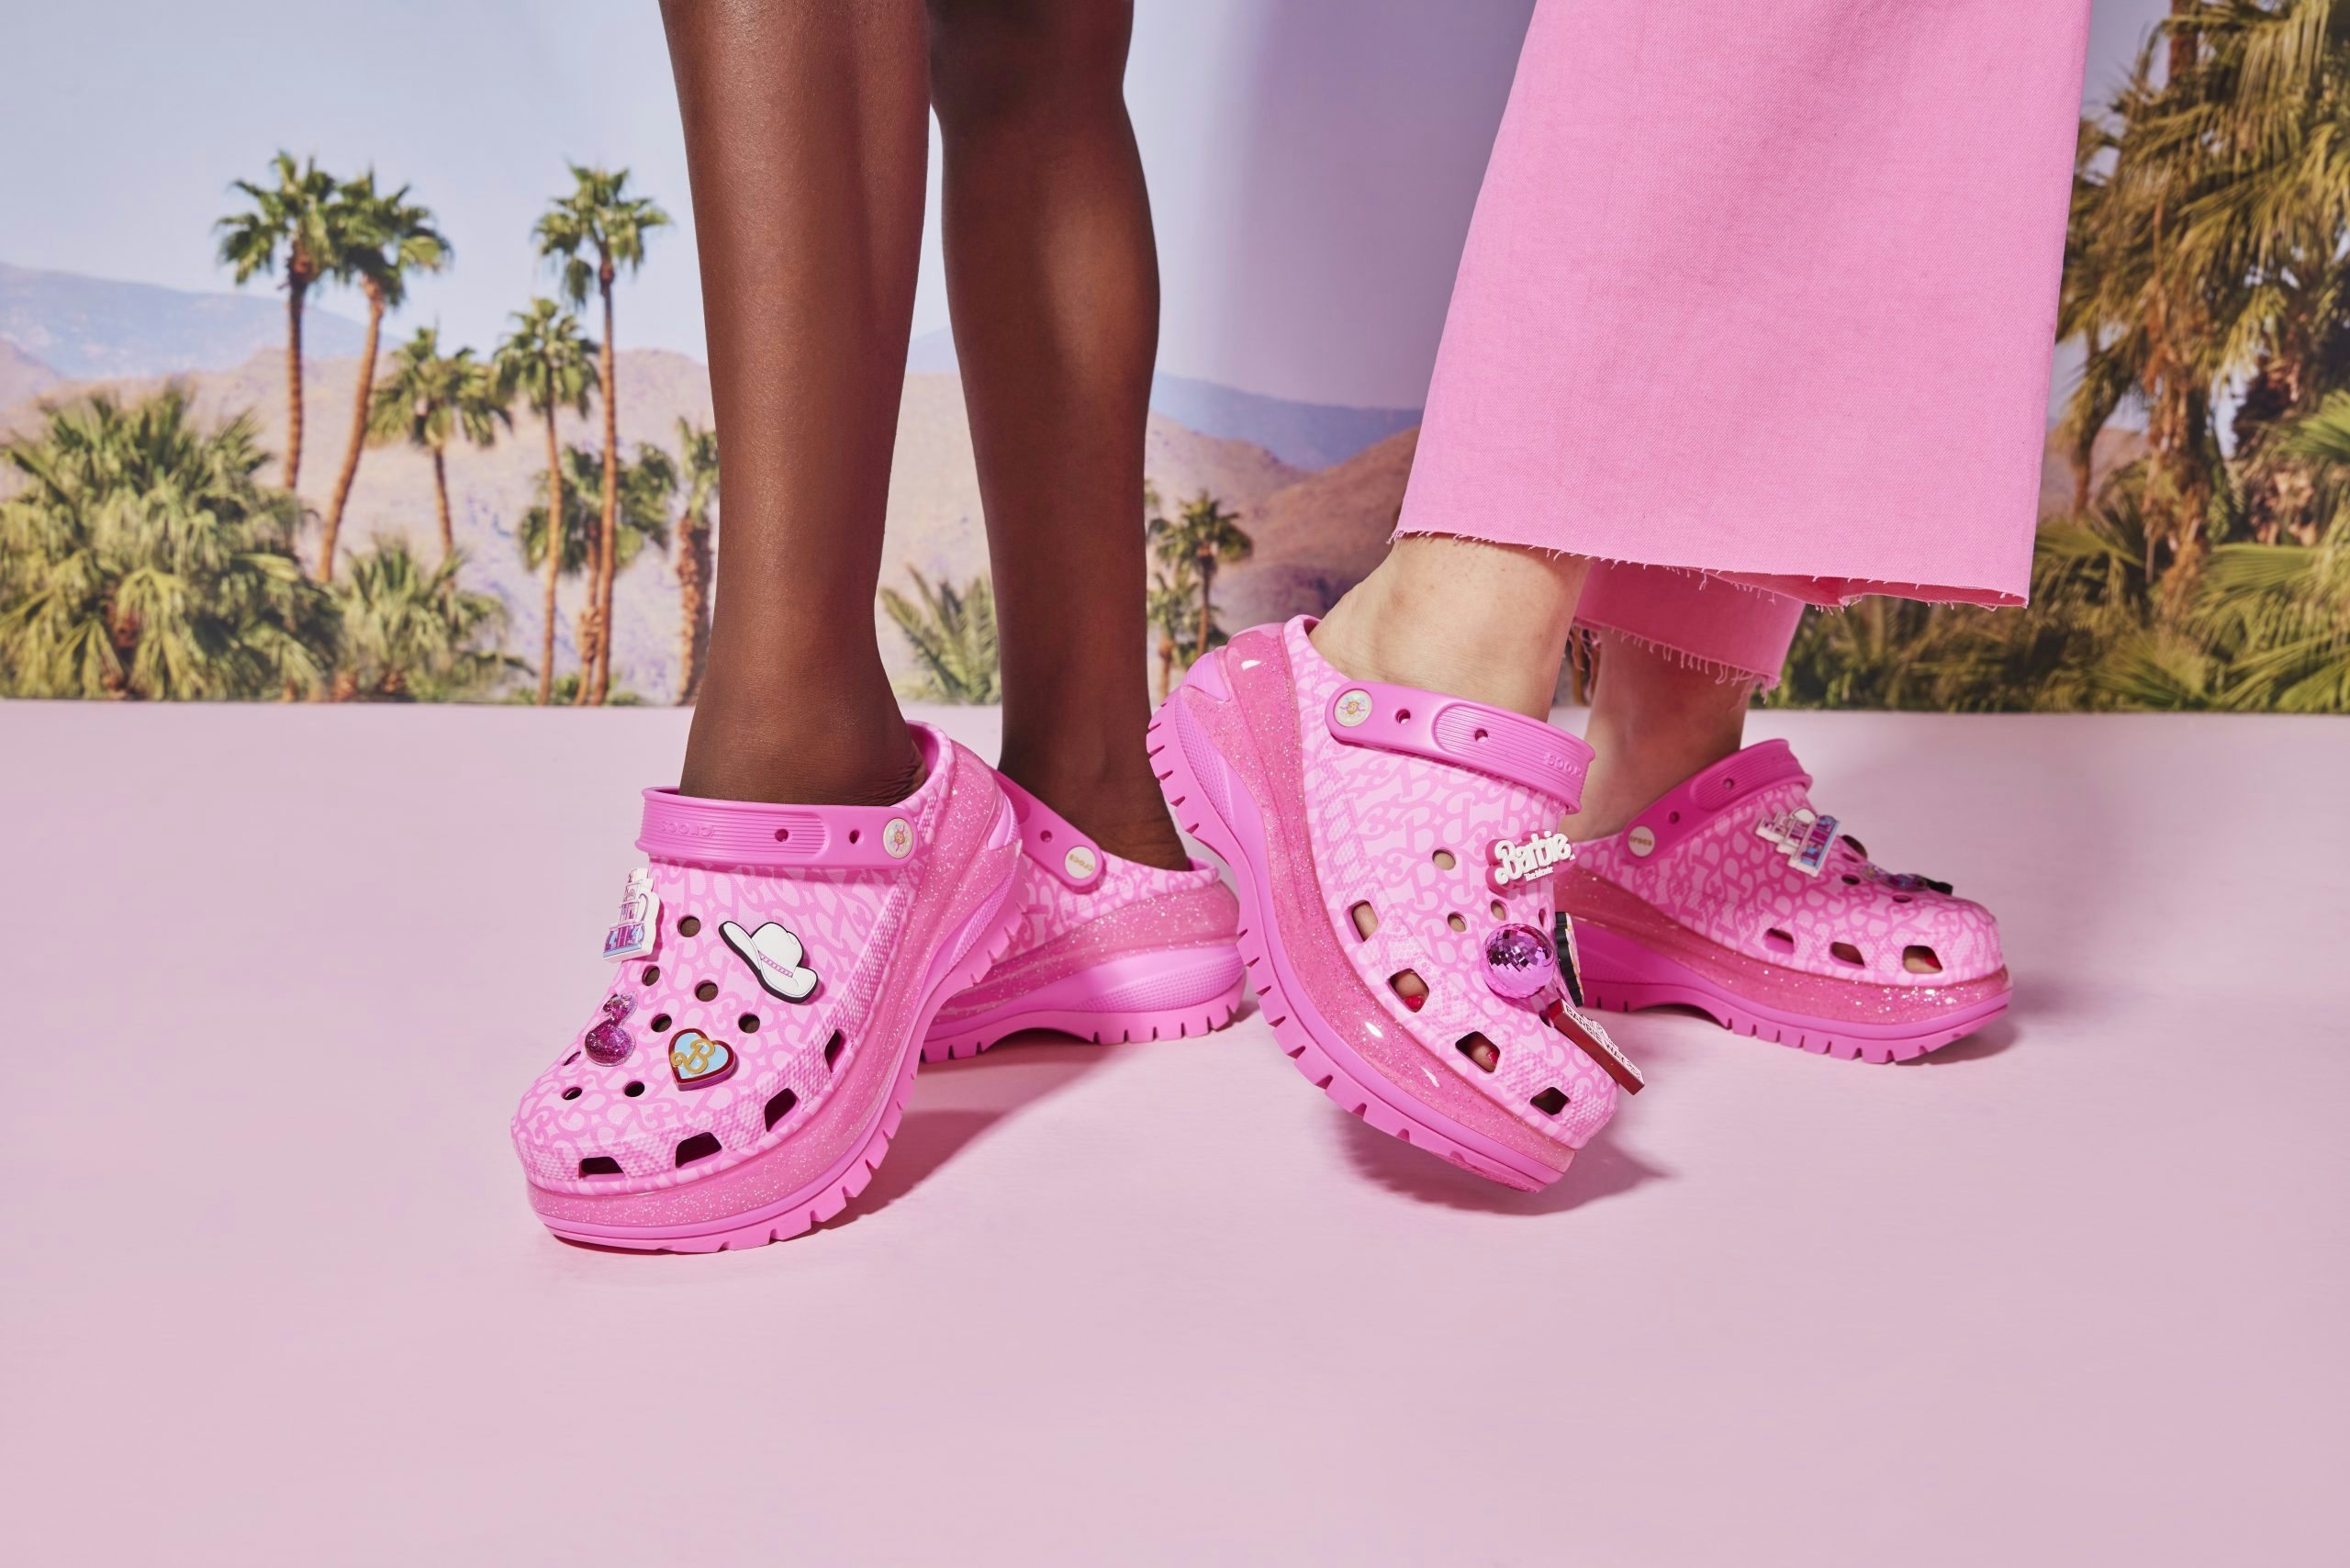 King of collabs, Crocs has managed to combine its status in fashion right now with Barbie's globally-loved nostalgia to pull off a headline collaboration. Photo: Crocs